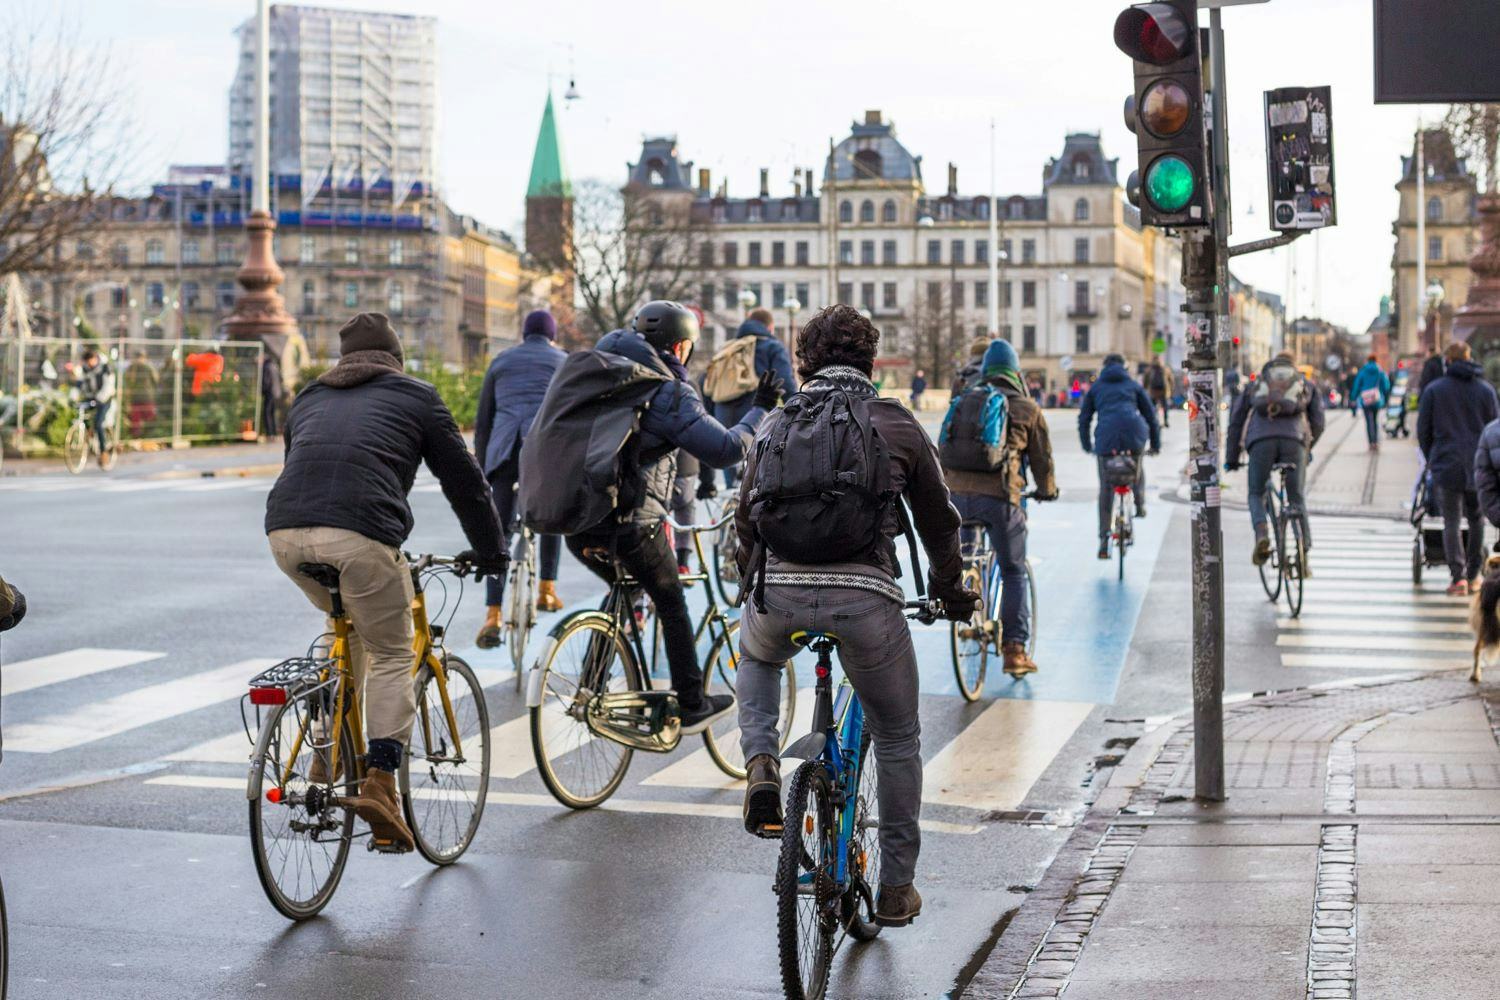 Investment in cycling infrastructure in Europe are of benefit to a country’s economic growth and health of its citizens, cycling advocacy groups argue. – Photo Shutterstock 